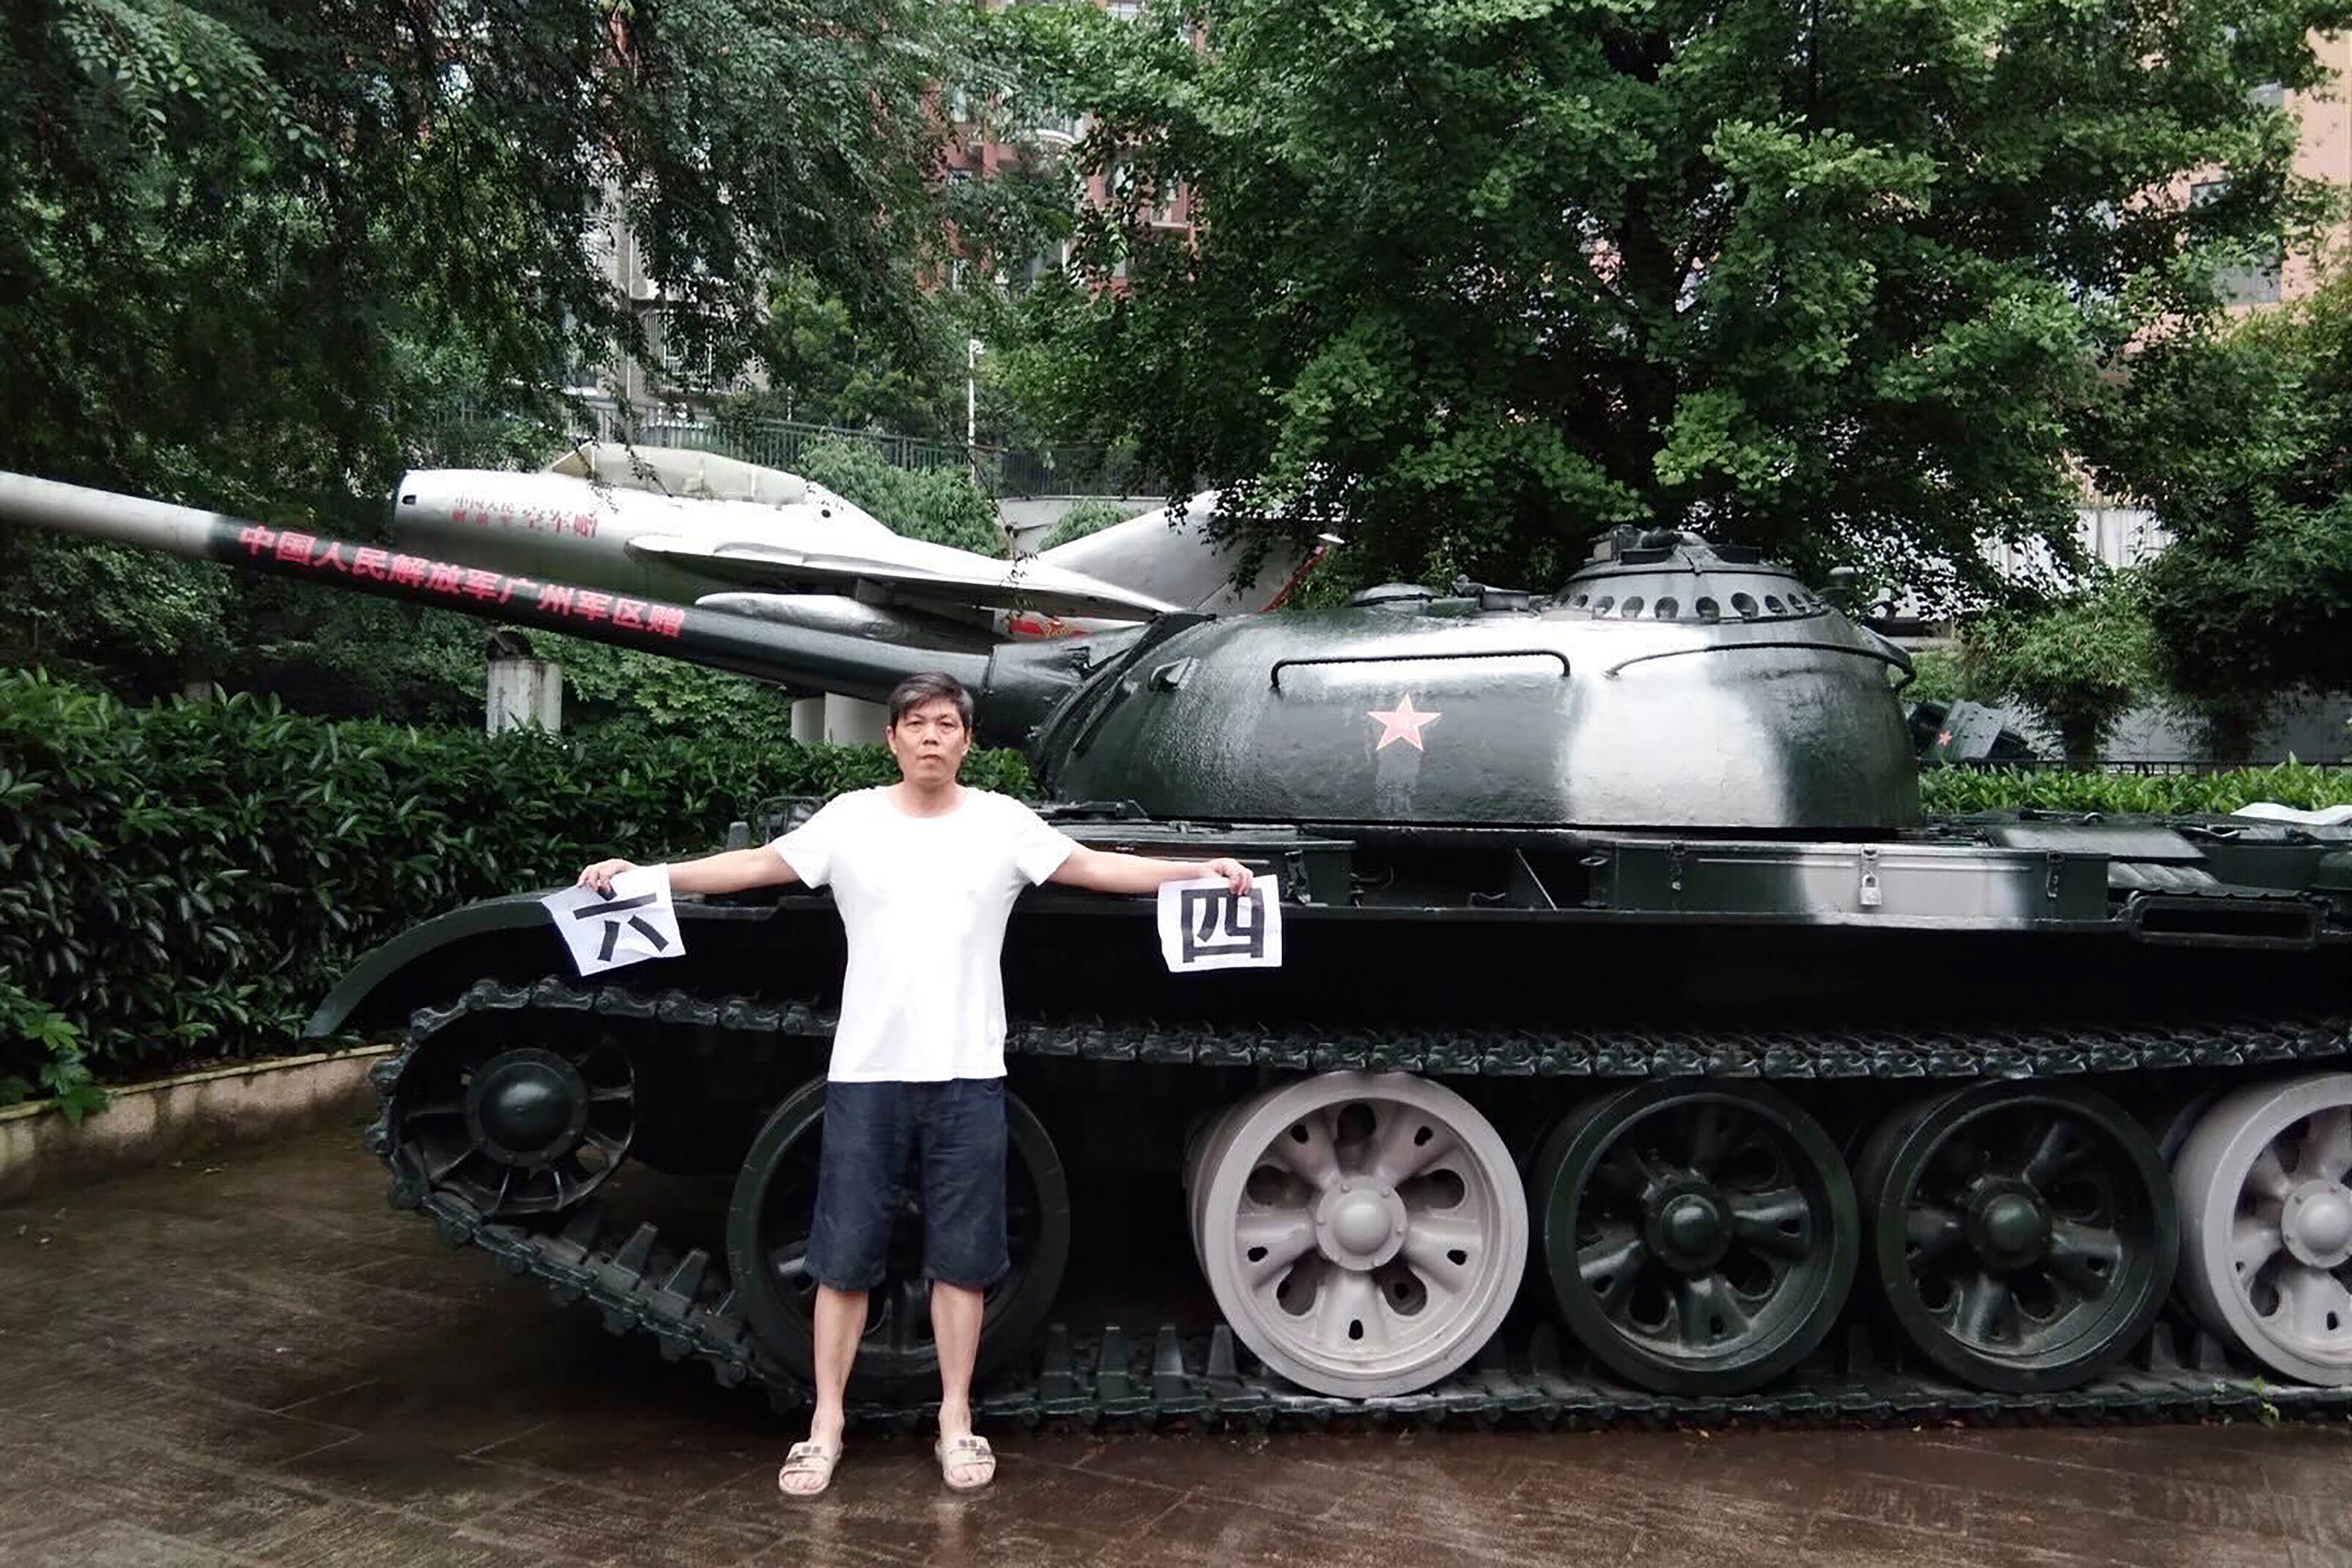 In this photo taken on 4 June 2018 by Chen Siming, he holds up pieces of paper with the Chinese characters for 6 and 4 referring to 4 June next to a display of an obsolete tank in Zhuzhou in central China’s Hunan province